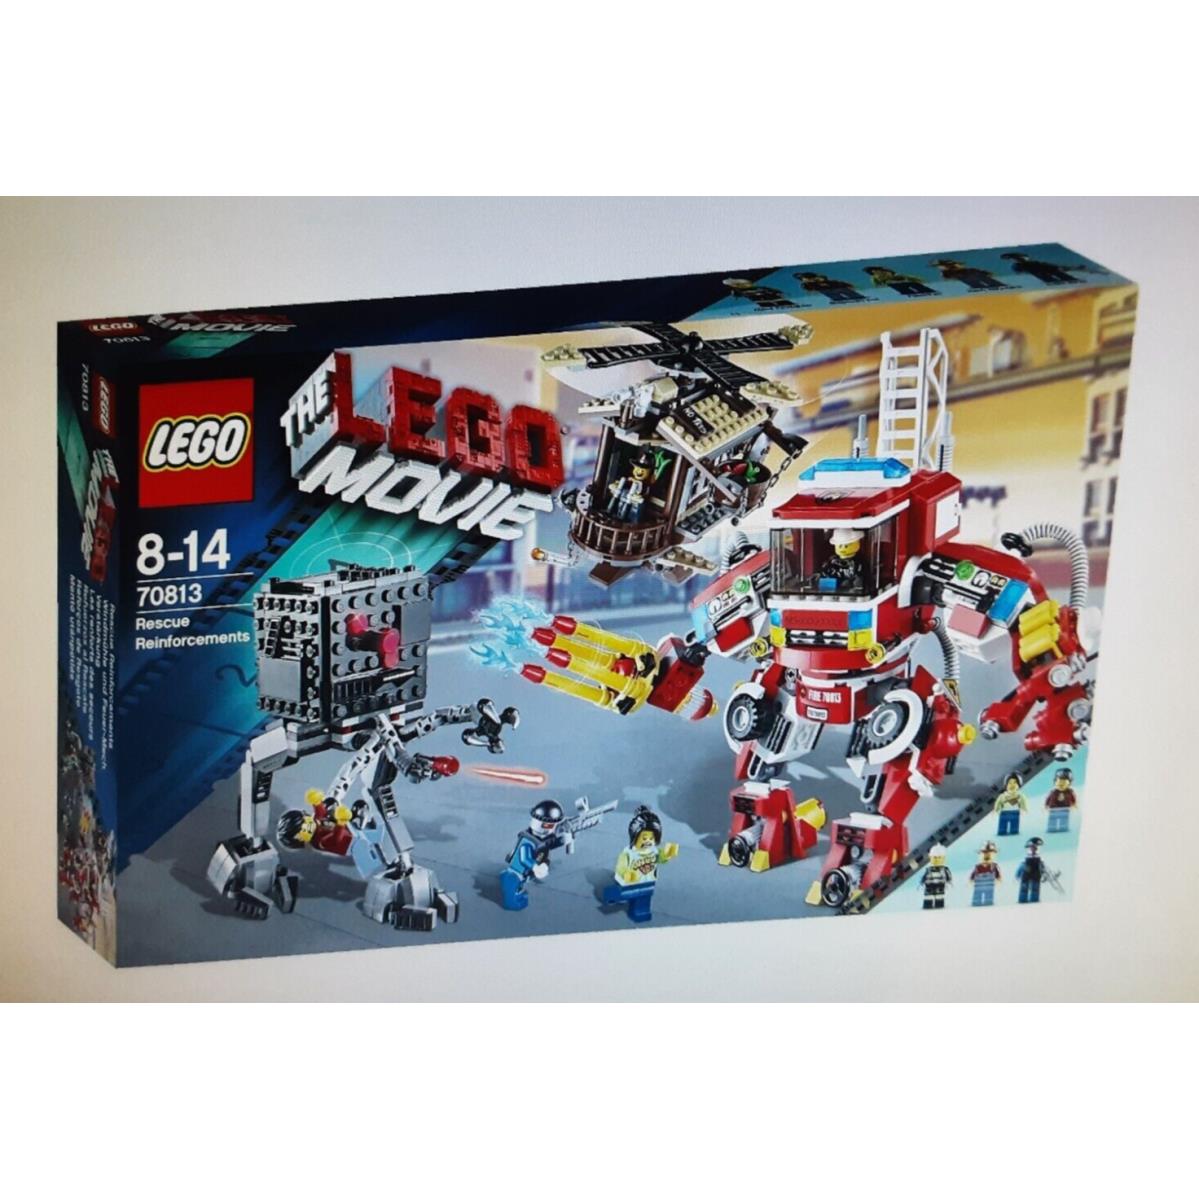 Lego The Lego Movie: Rescue Reinforcements 70813